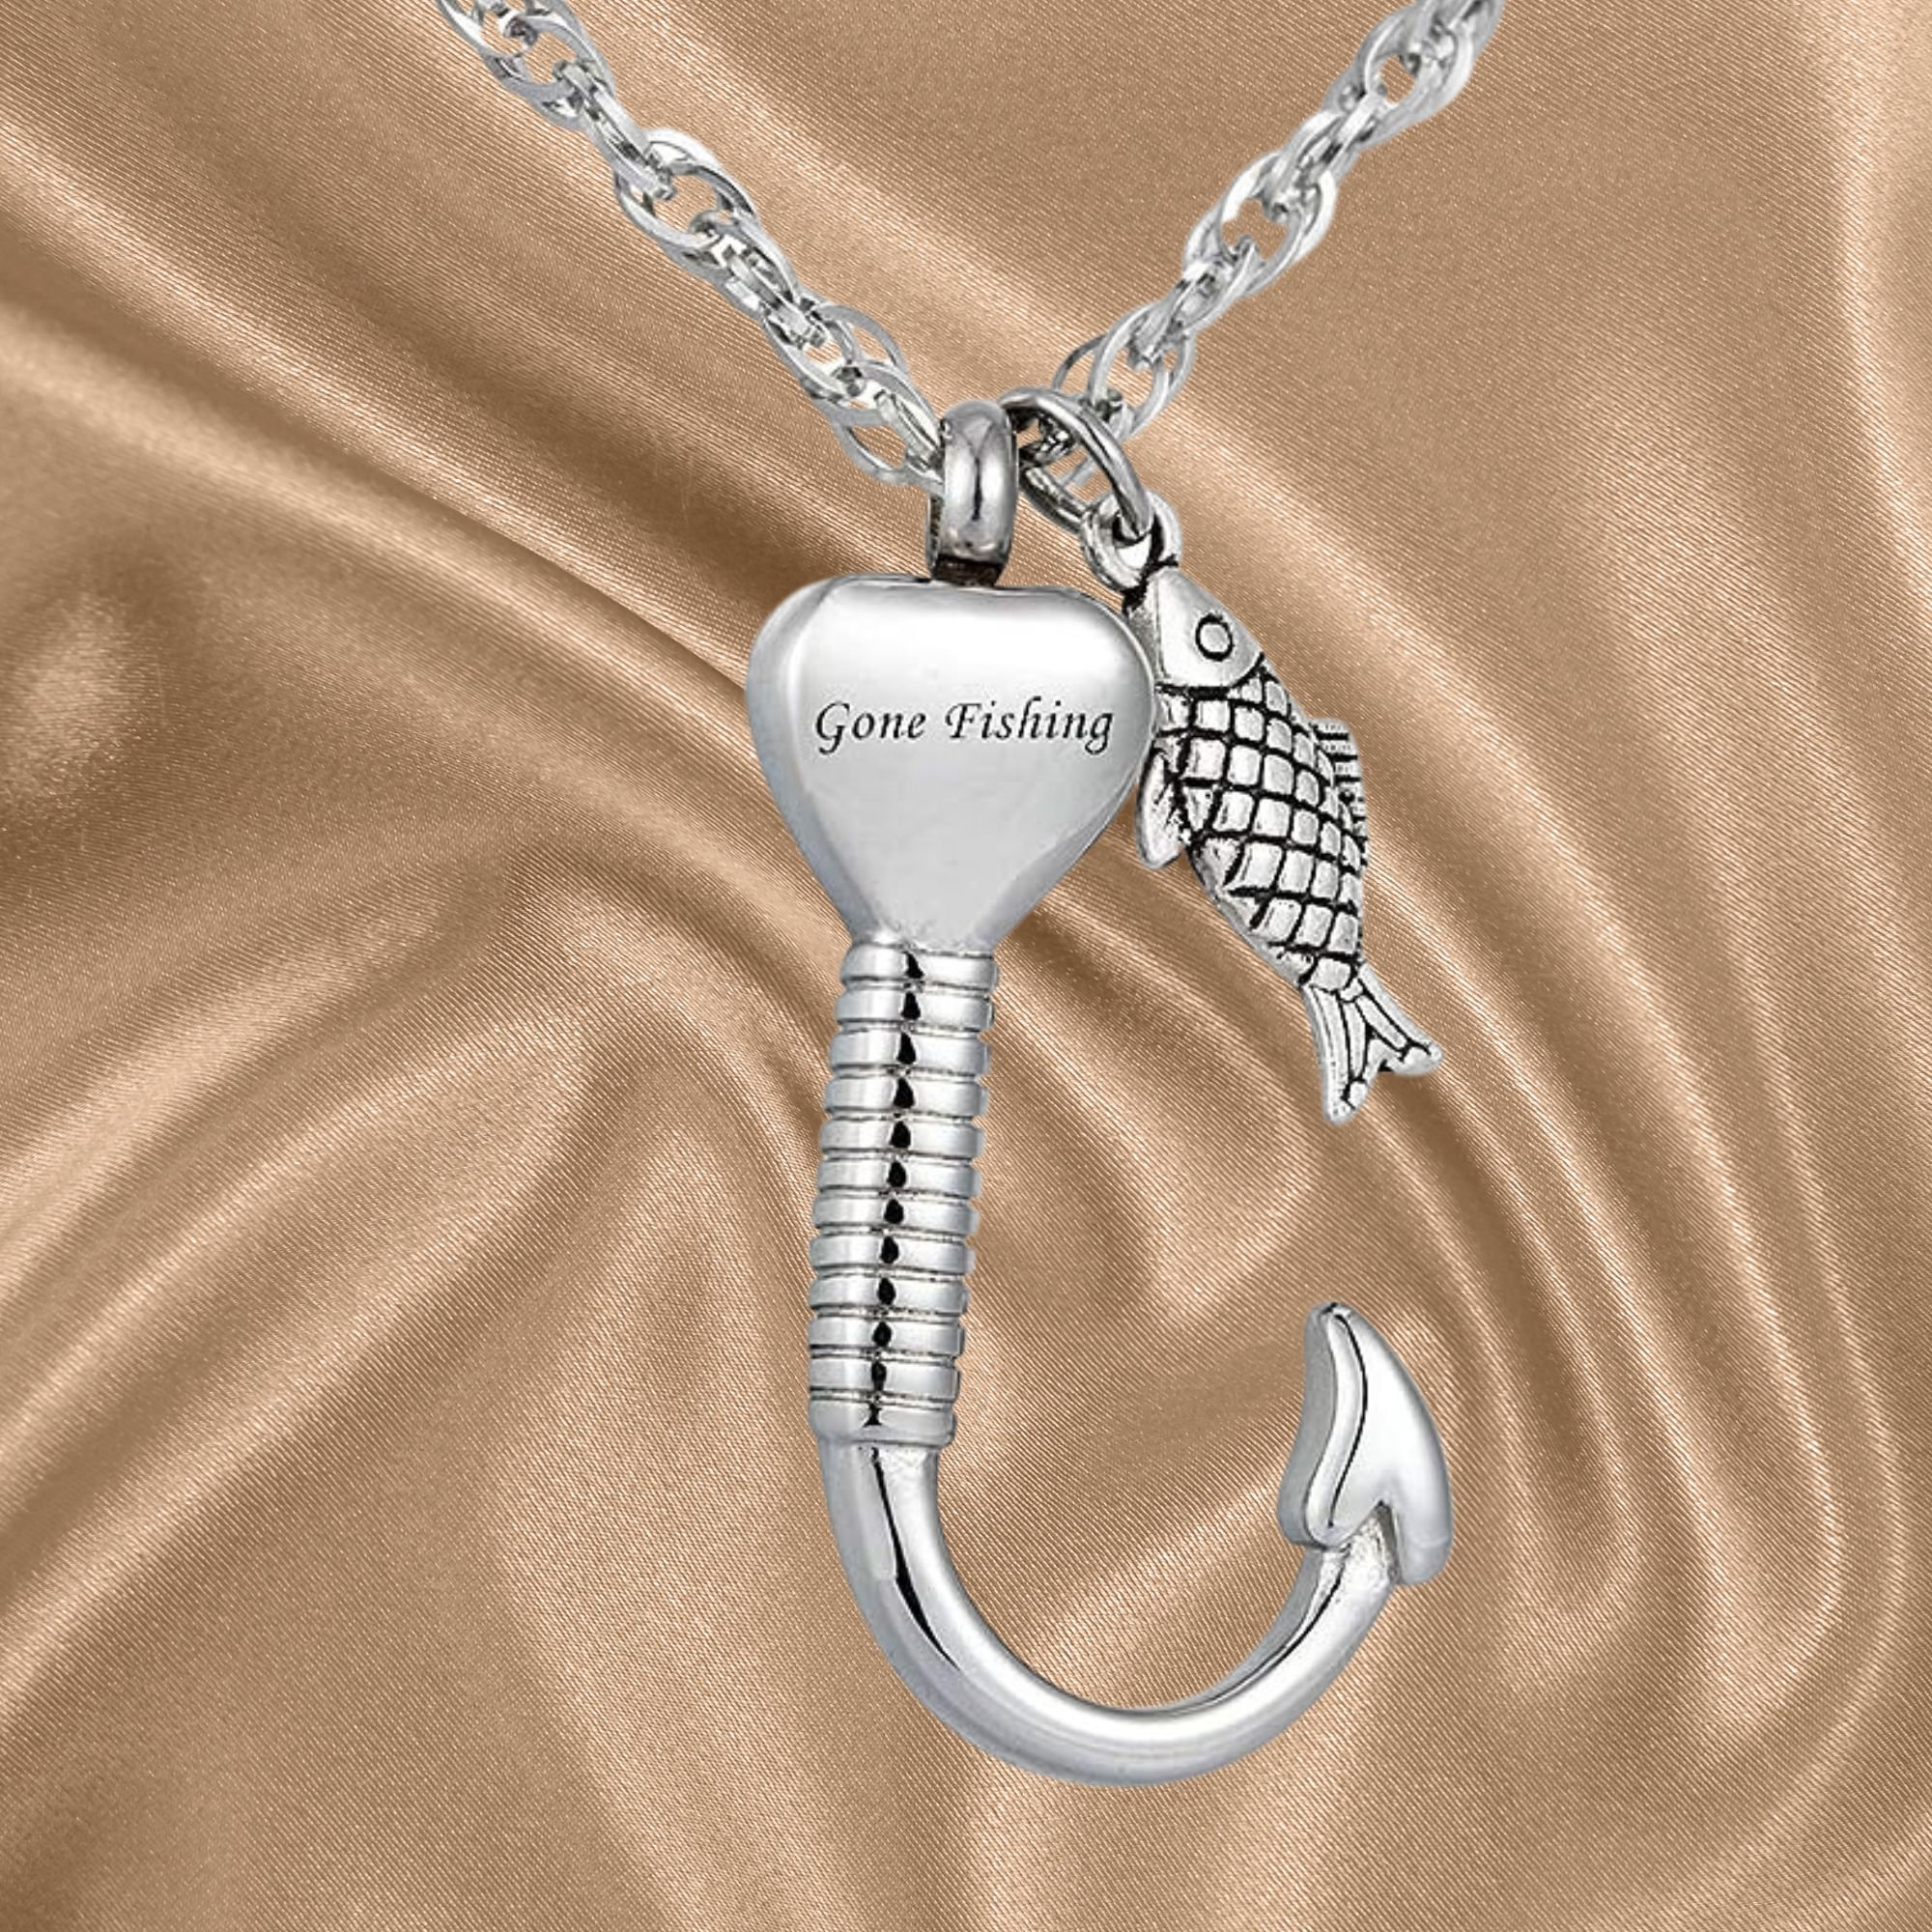 Gone Fishing Urn Necklace For Ashes Fish Hook Cremation Urn Pendant Fishing in Heaven Keepsake Jewelry